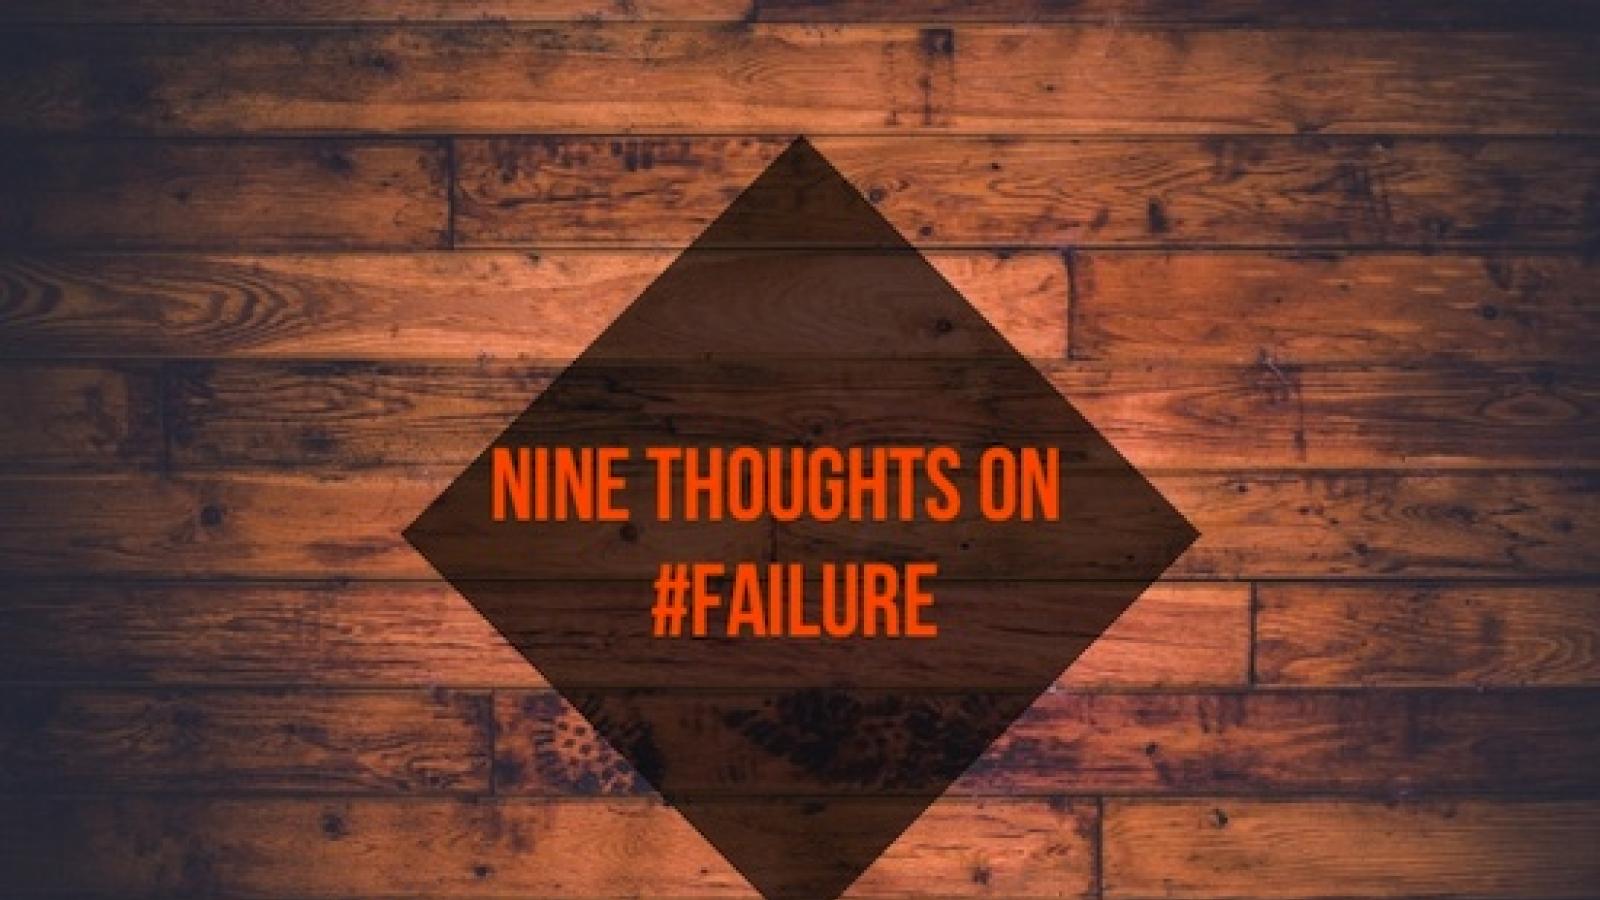 Text that reads "Nine Thoughts on Hashtag Failure" against a photo background that looks like wood planks